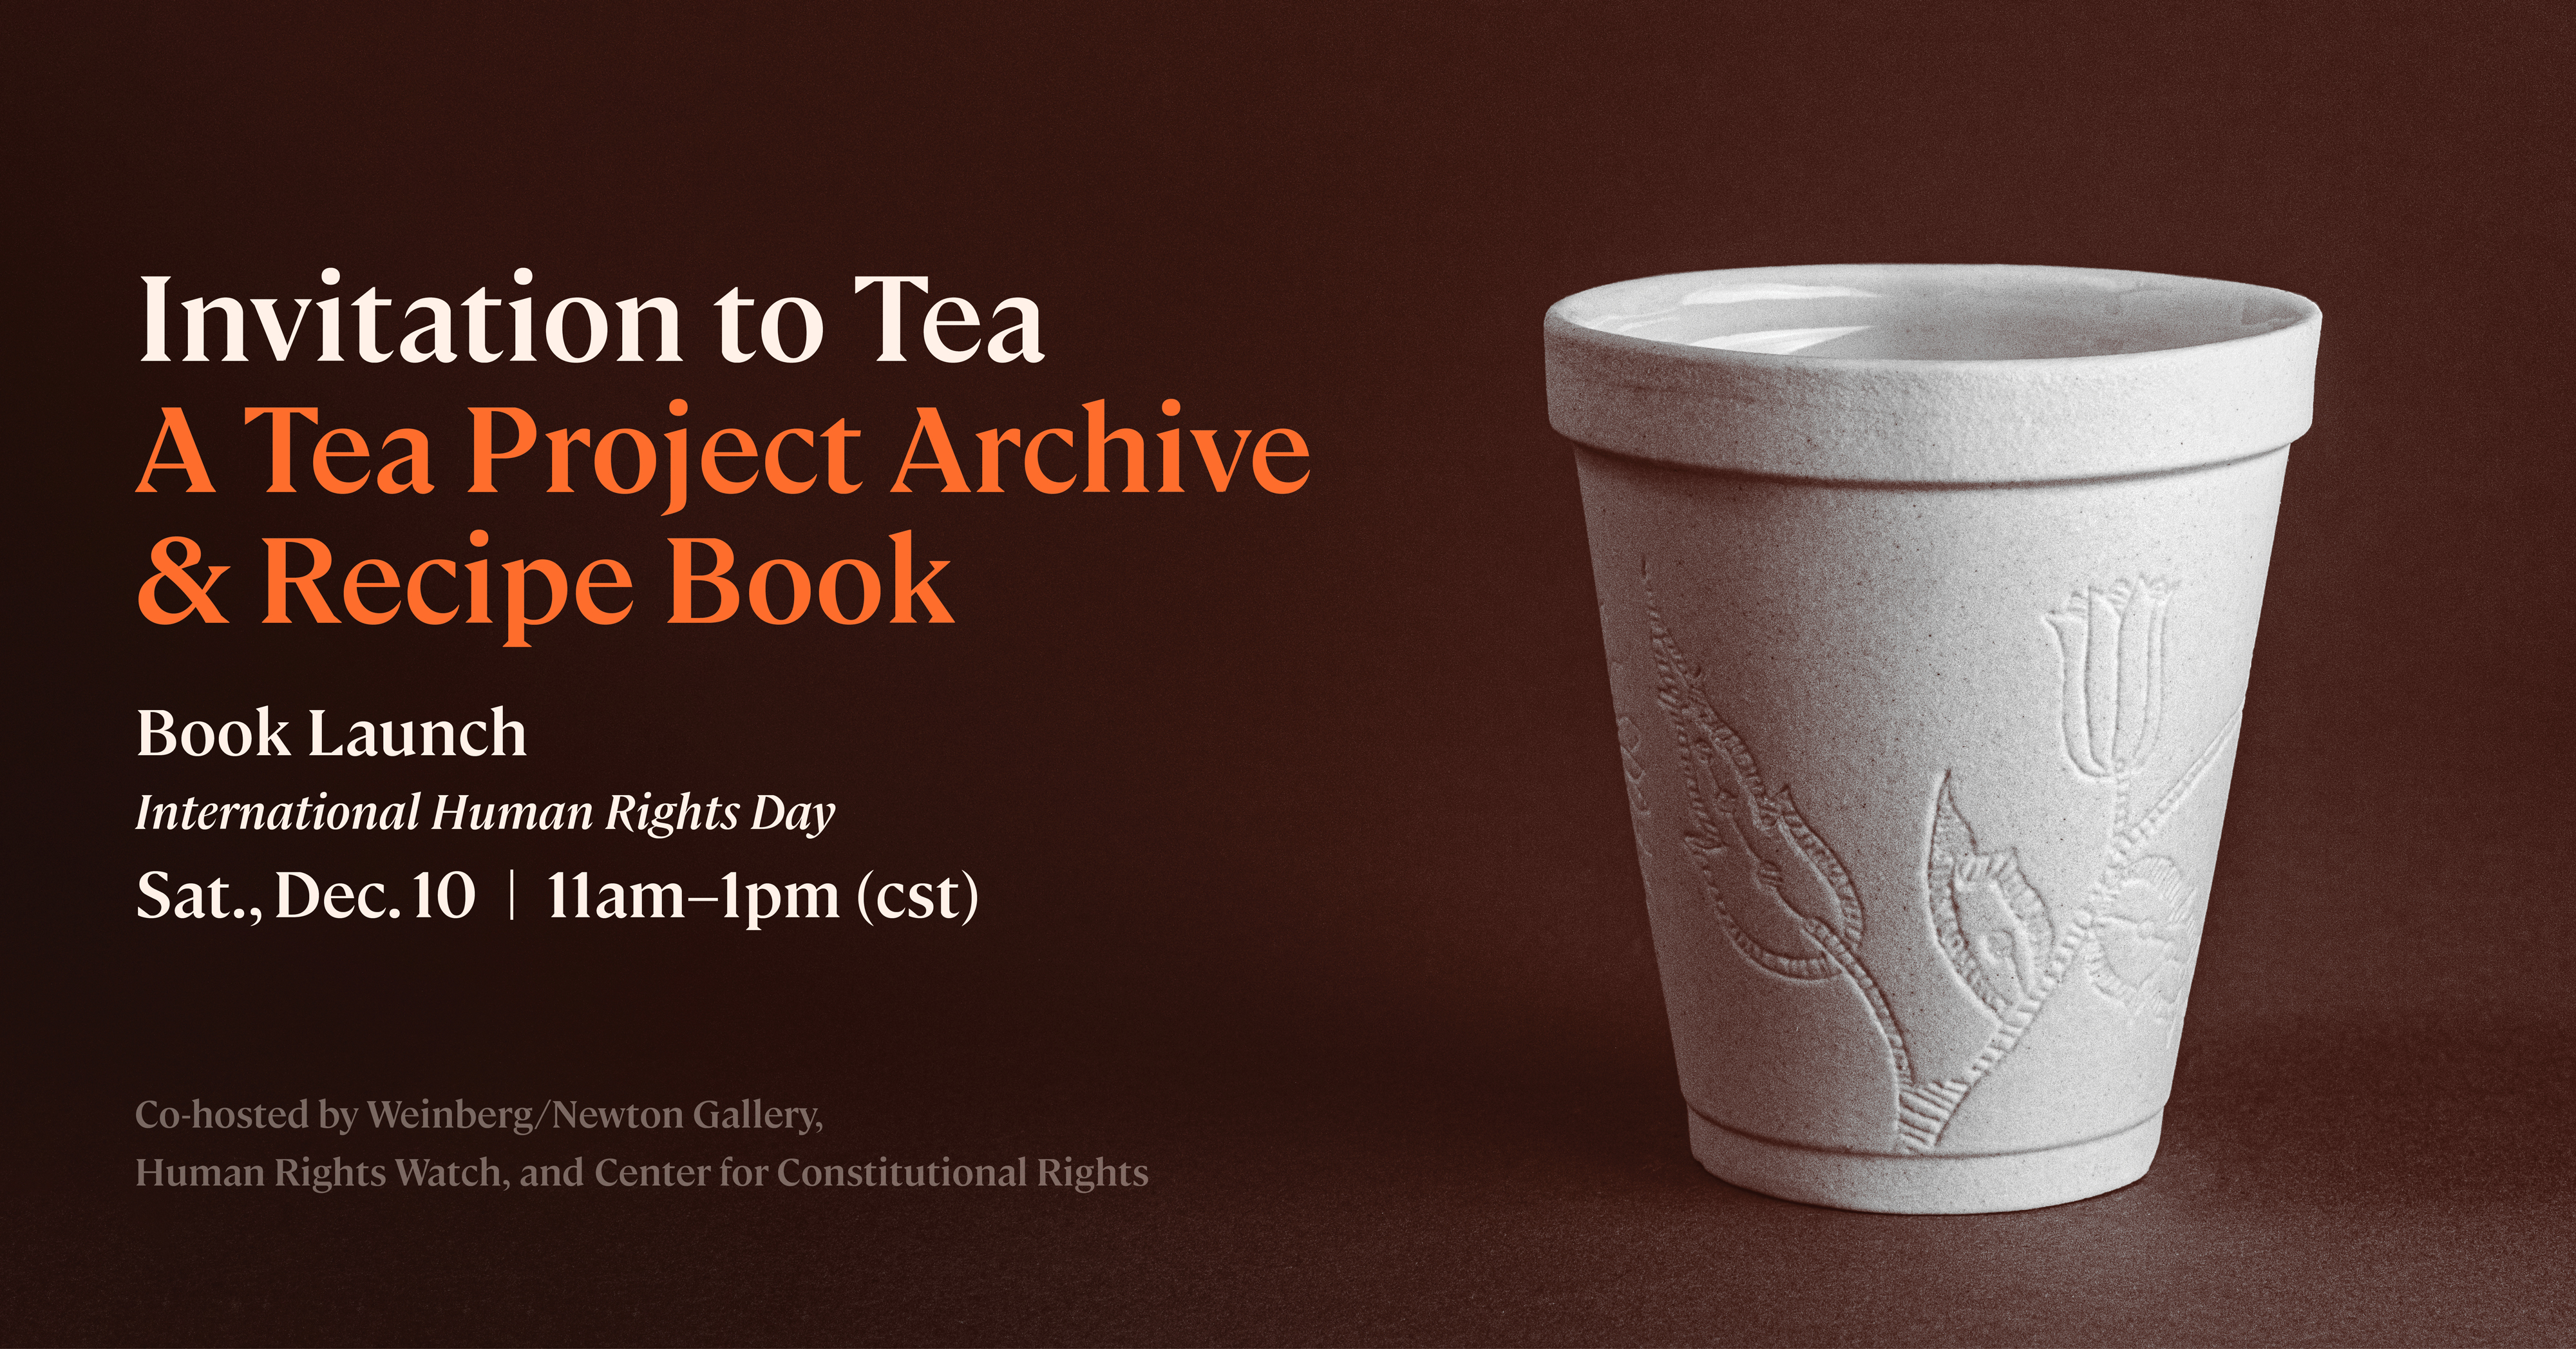 A brown square graphic with a picture of a styrofoam cup with flowers etched into it. Reads Invitation to Tea: a Tea Project Archive and Recipe Book. Book Launch. International Human Rights Day. Sat., Dec 10. 11 am to 1 pm Central time. Co-hosted by the Weinberg/Newton Gallery, Human Rights Watch, and the Center for Constitutional Rights.